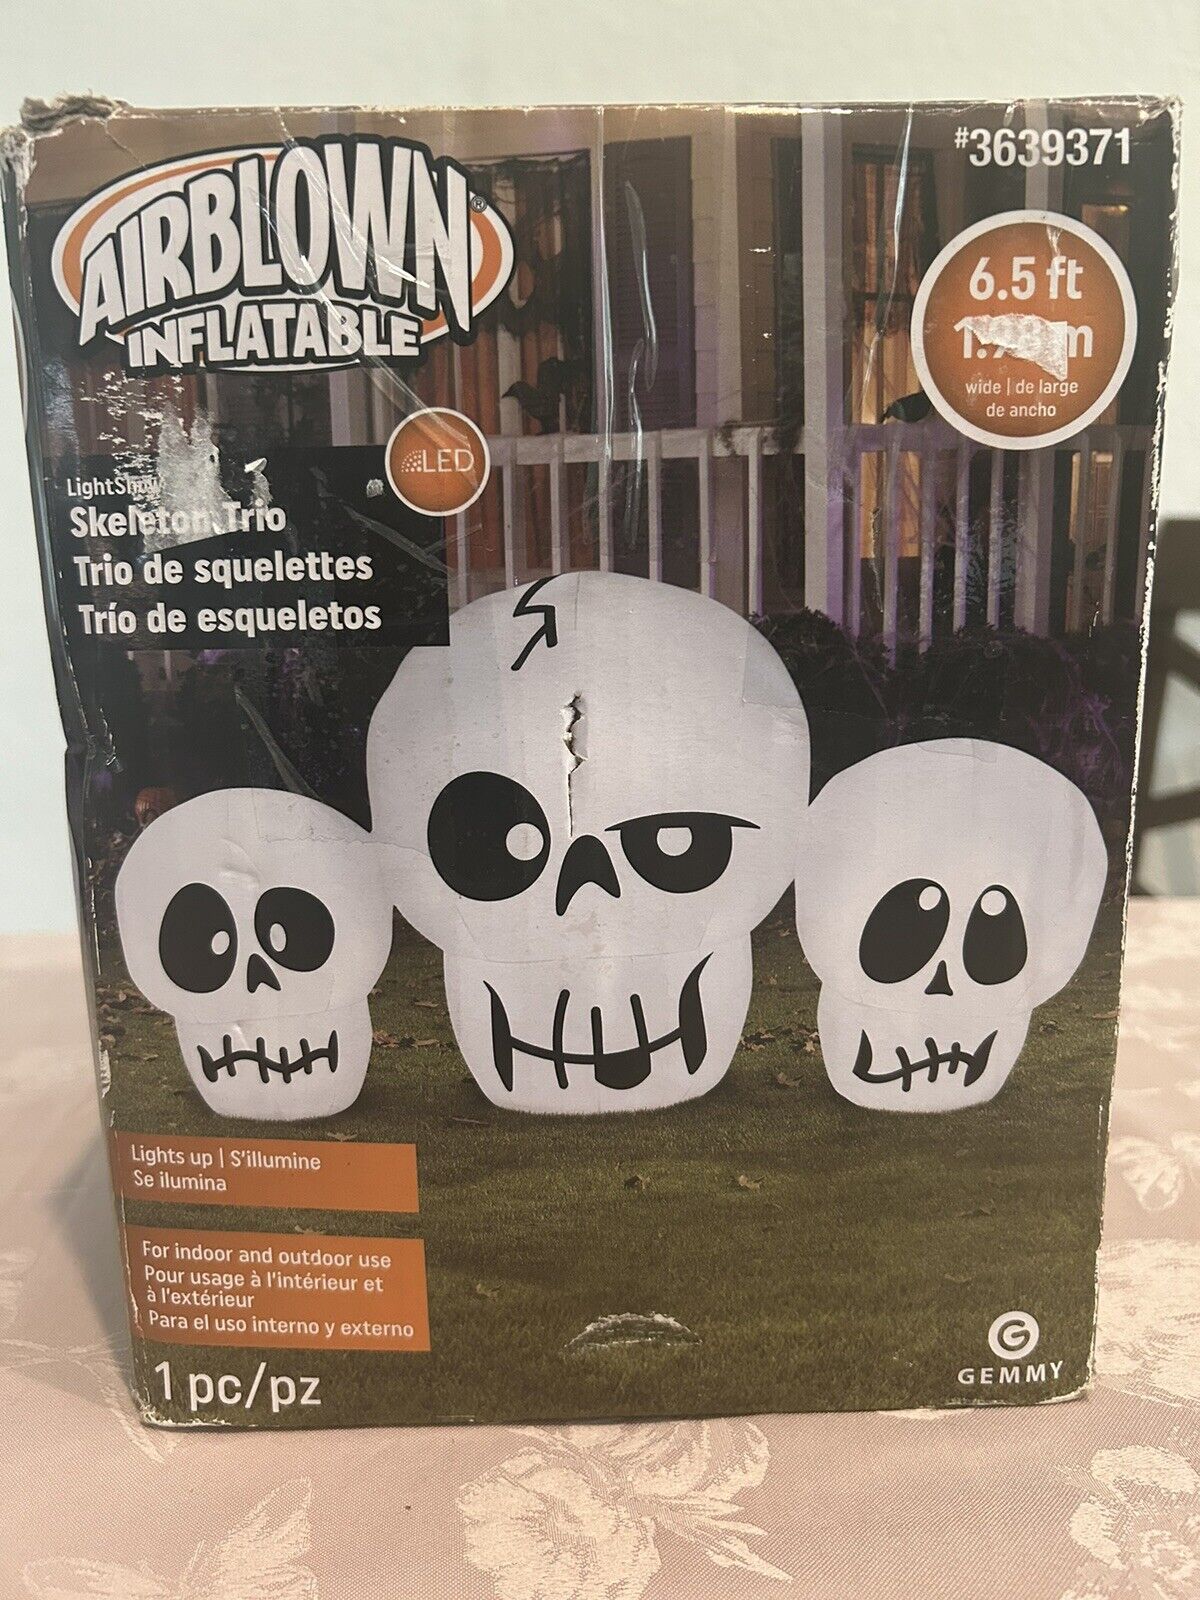 Halloween Gemmy 6.5 ft Lightshow Skeleton Trio Airblown Inflatable Pre Owned